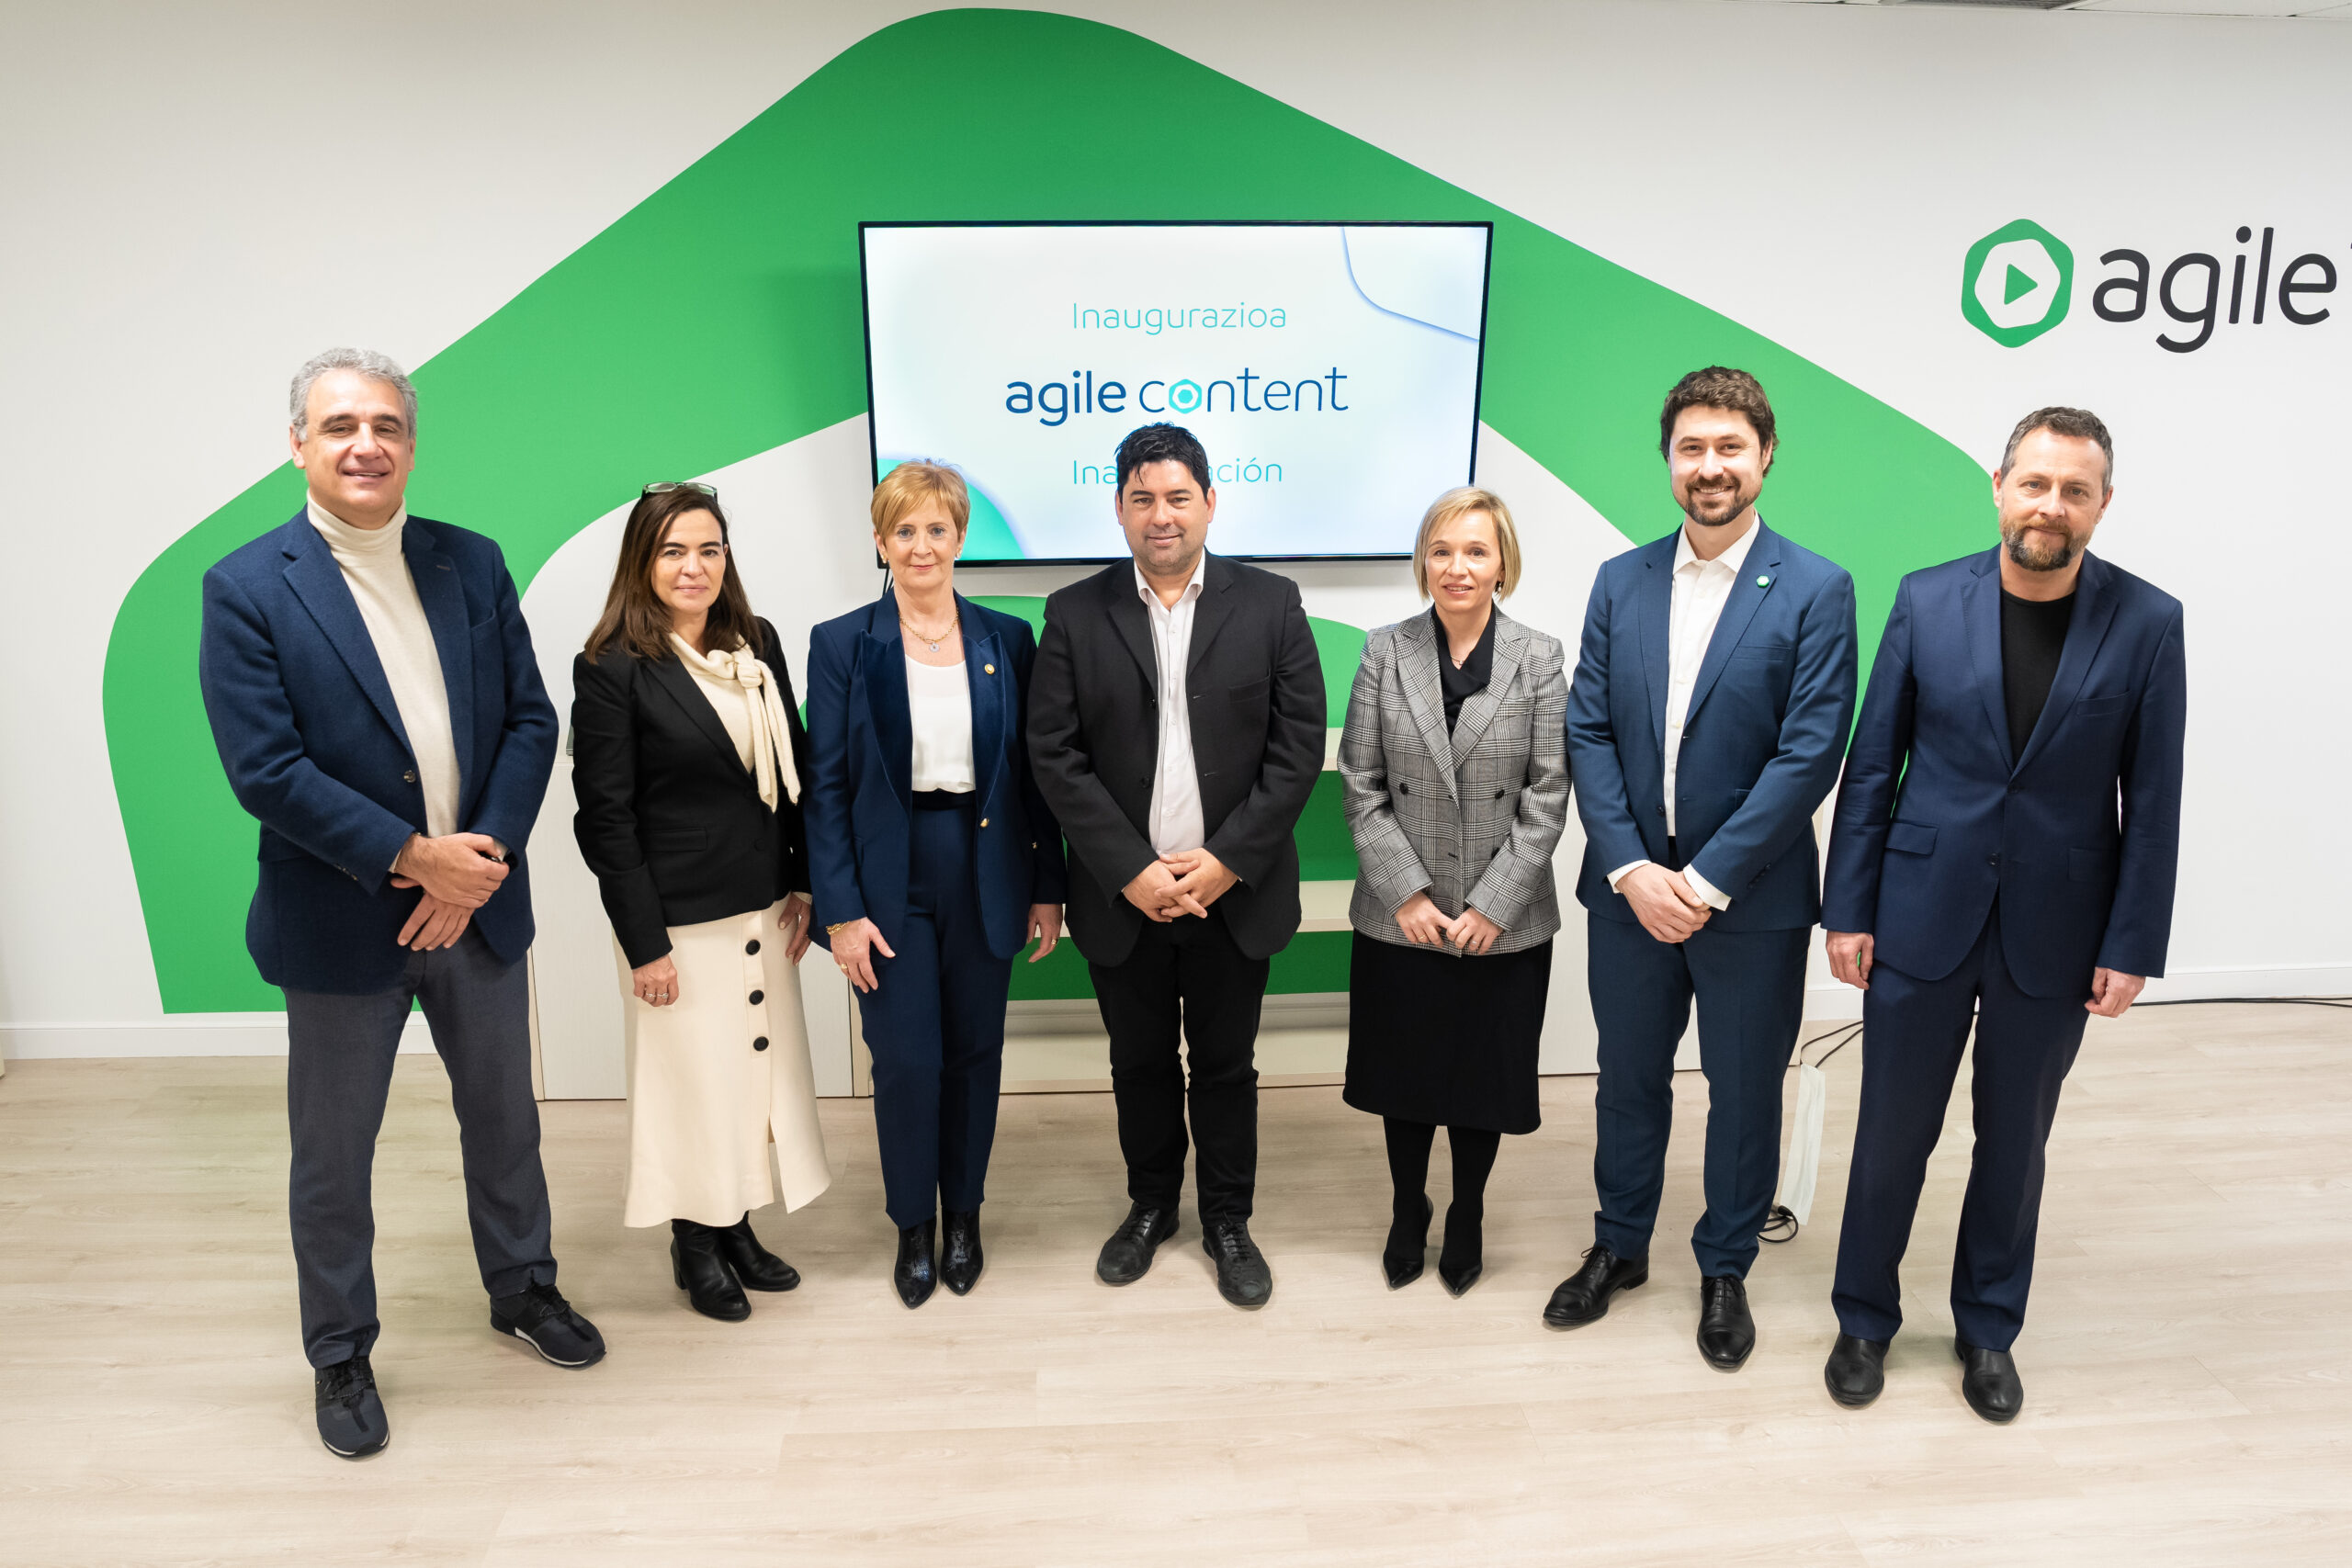 Agile Content wraps up 2023 with 14.1 Million Euros in EBITDA and welcomes Koldo Unanue as CEO